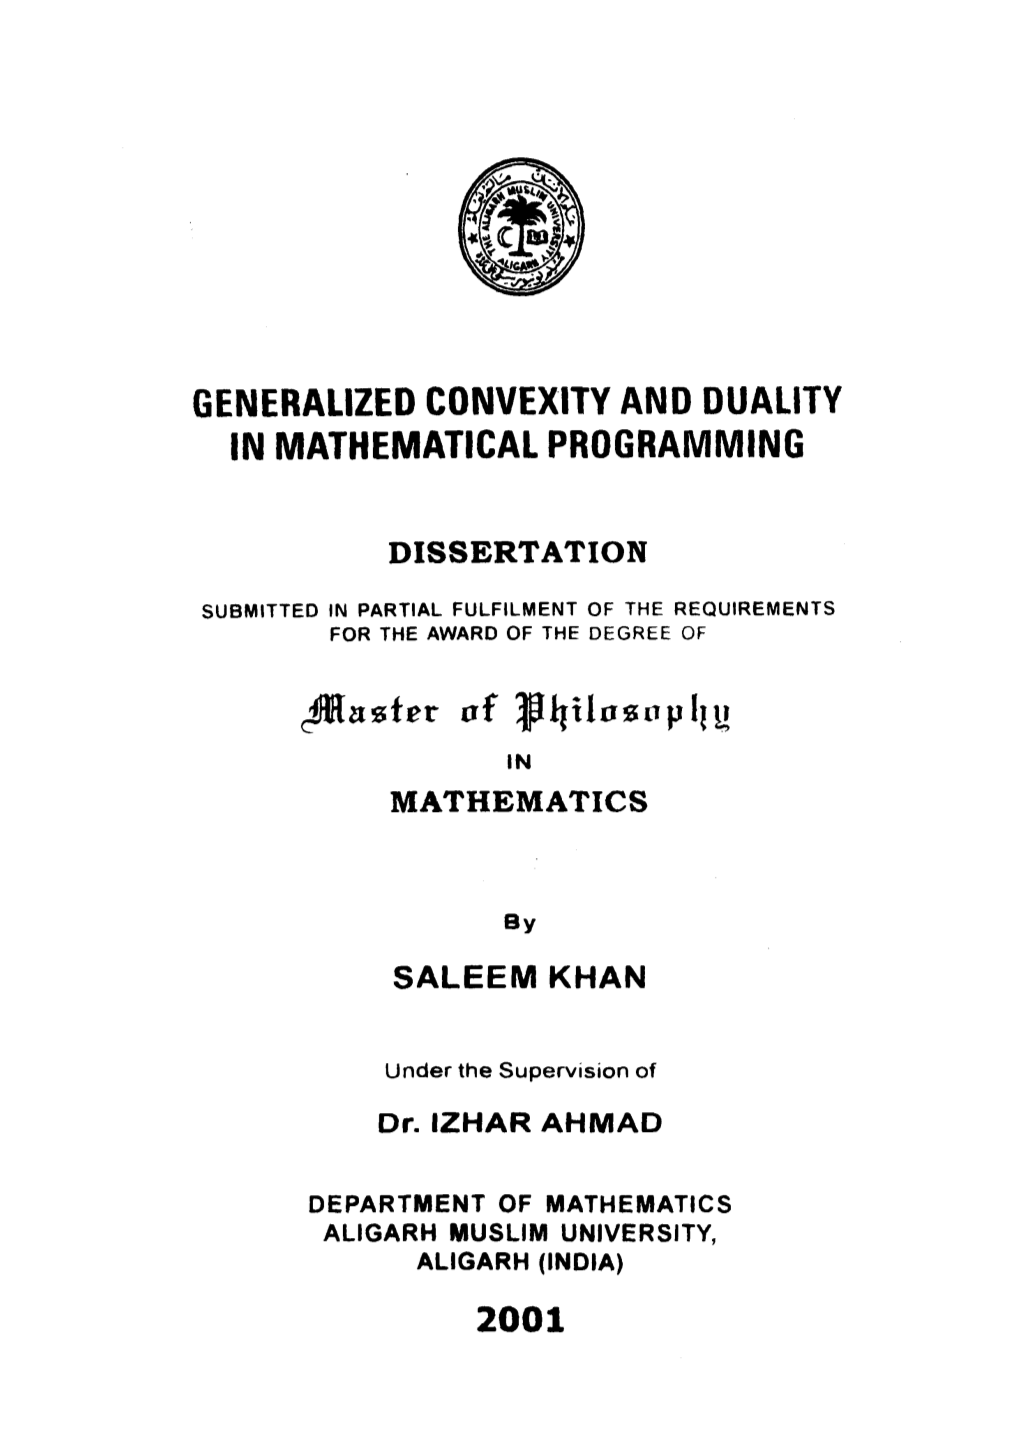 Generalized Convexity and Duality in Mathematical Programming